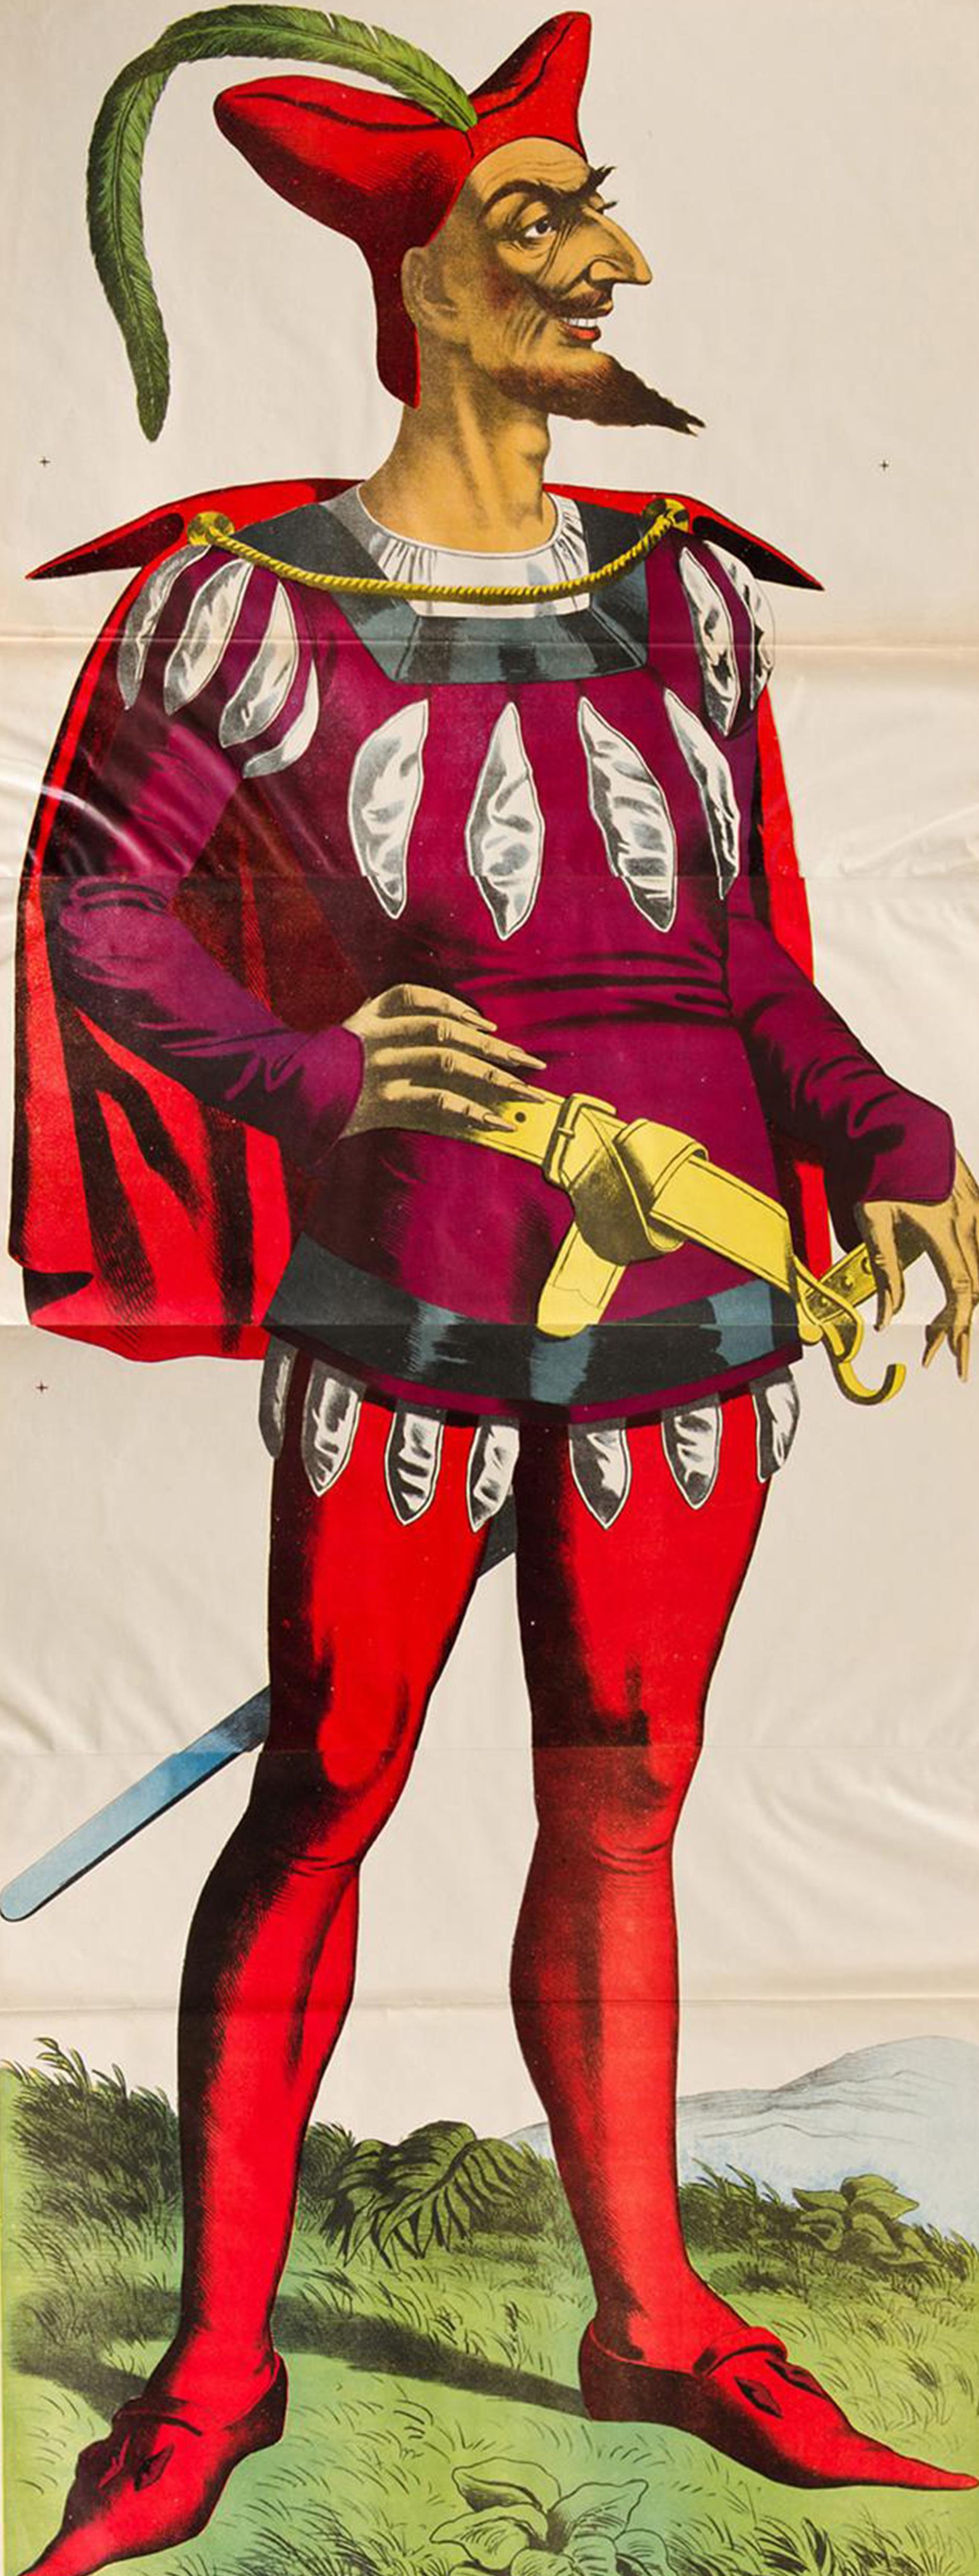 Rare, large-sized colored lithograph of Mephistopheles, published circa 1910:

**Subject**: Mephistopheles
**Publication Year**: Circa 1910

This is a rare and large-sized colored lithograph depicting Mephistopheles, a well-known demonic figure from